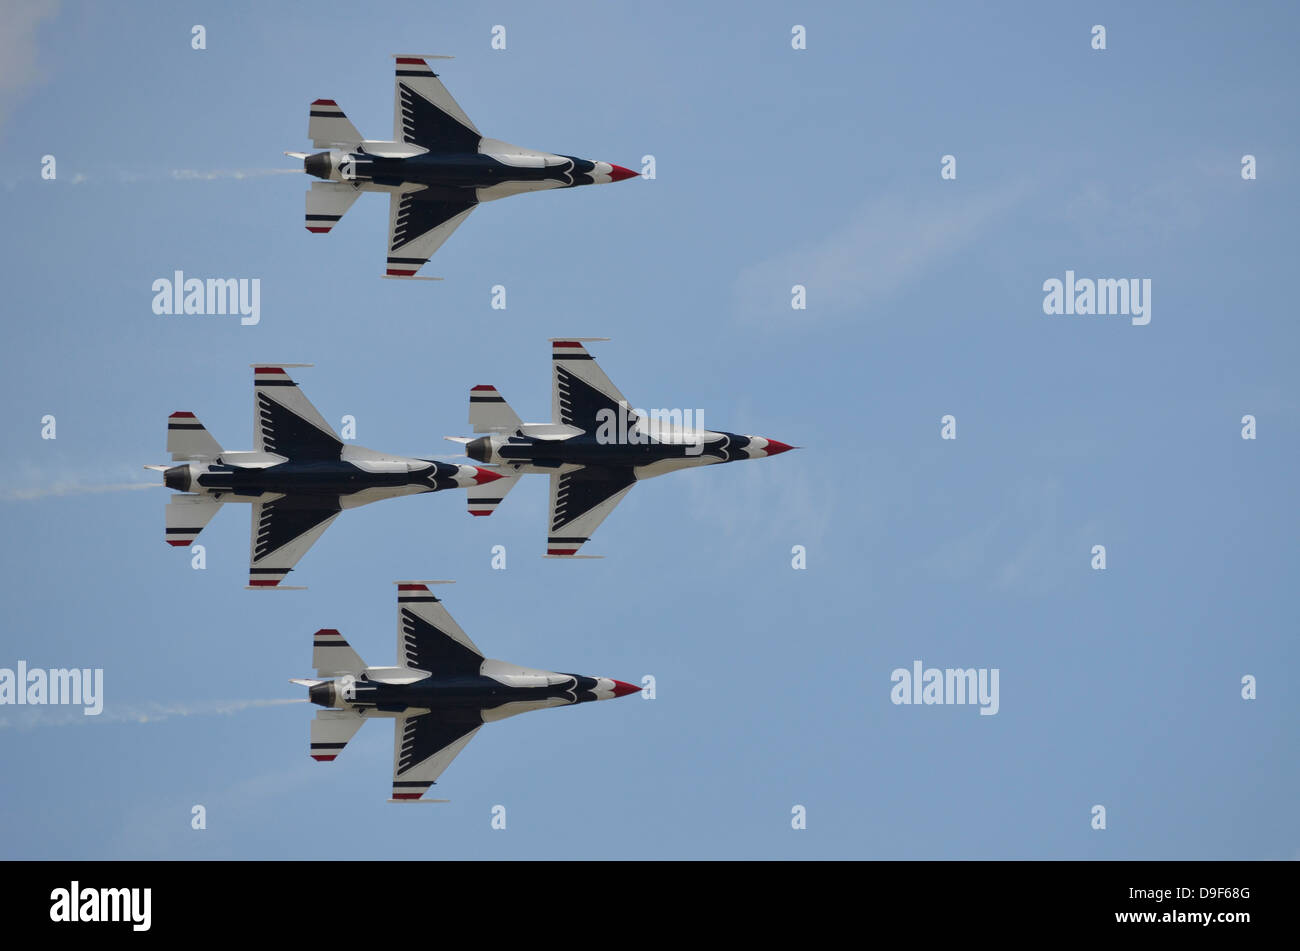 Die United States Air Force Thunderbirds Demonstration Squadron fliegen in Diamant-Formation in Lakeland, Florida. Stockfoto